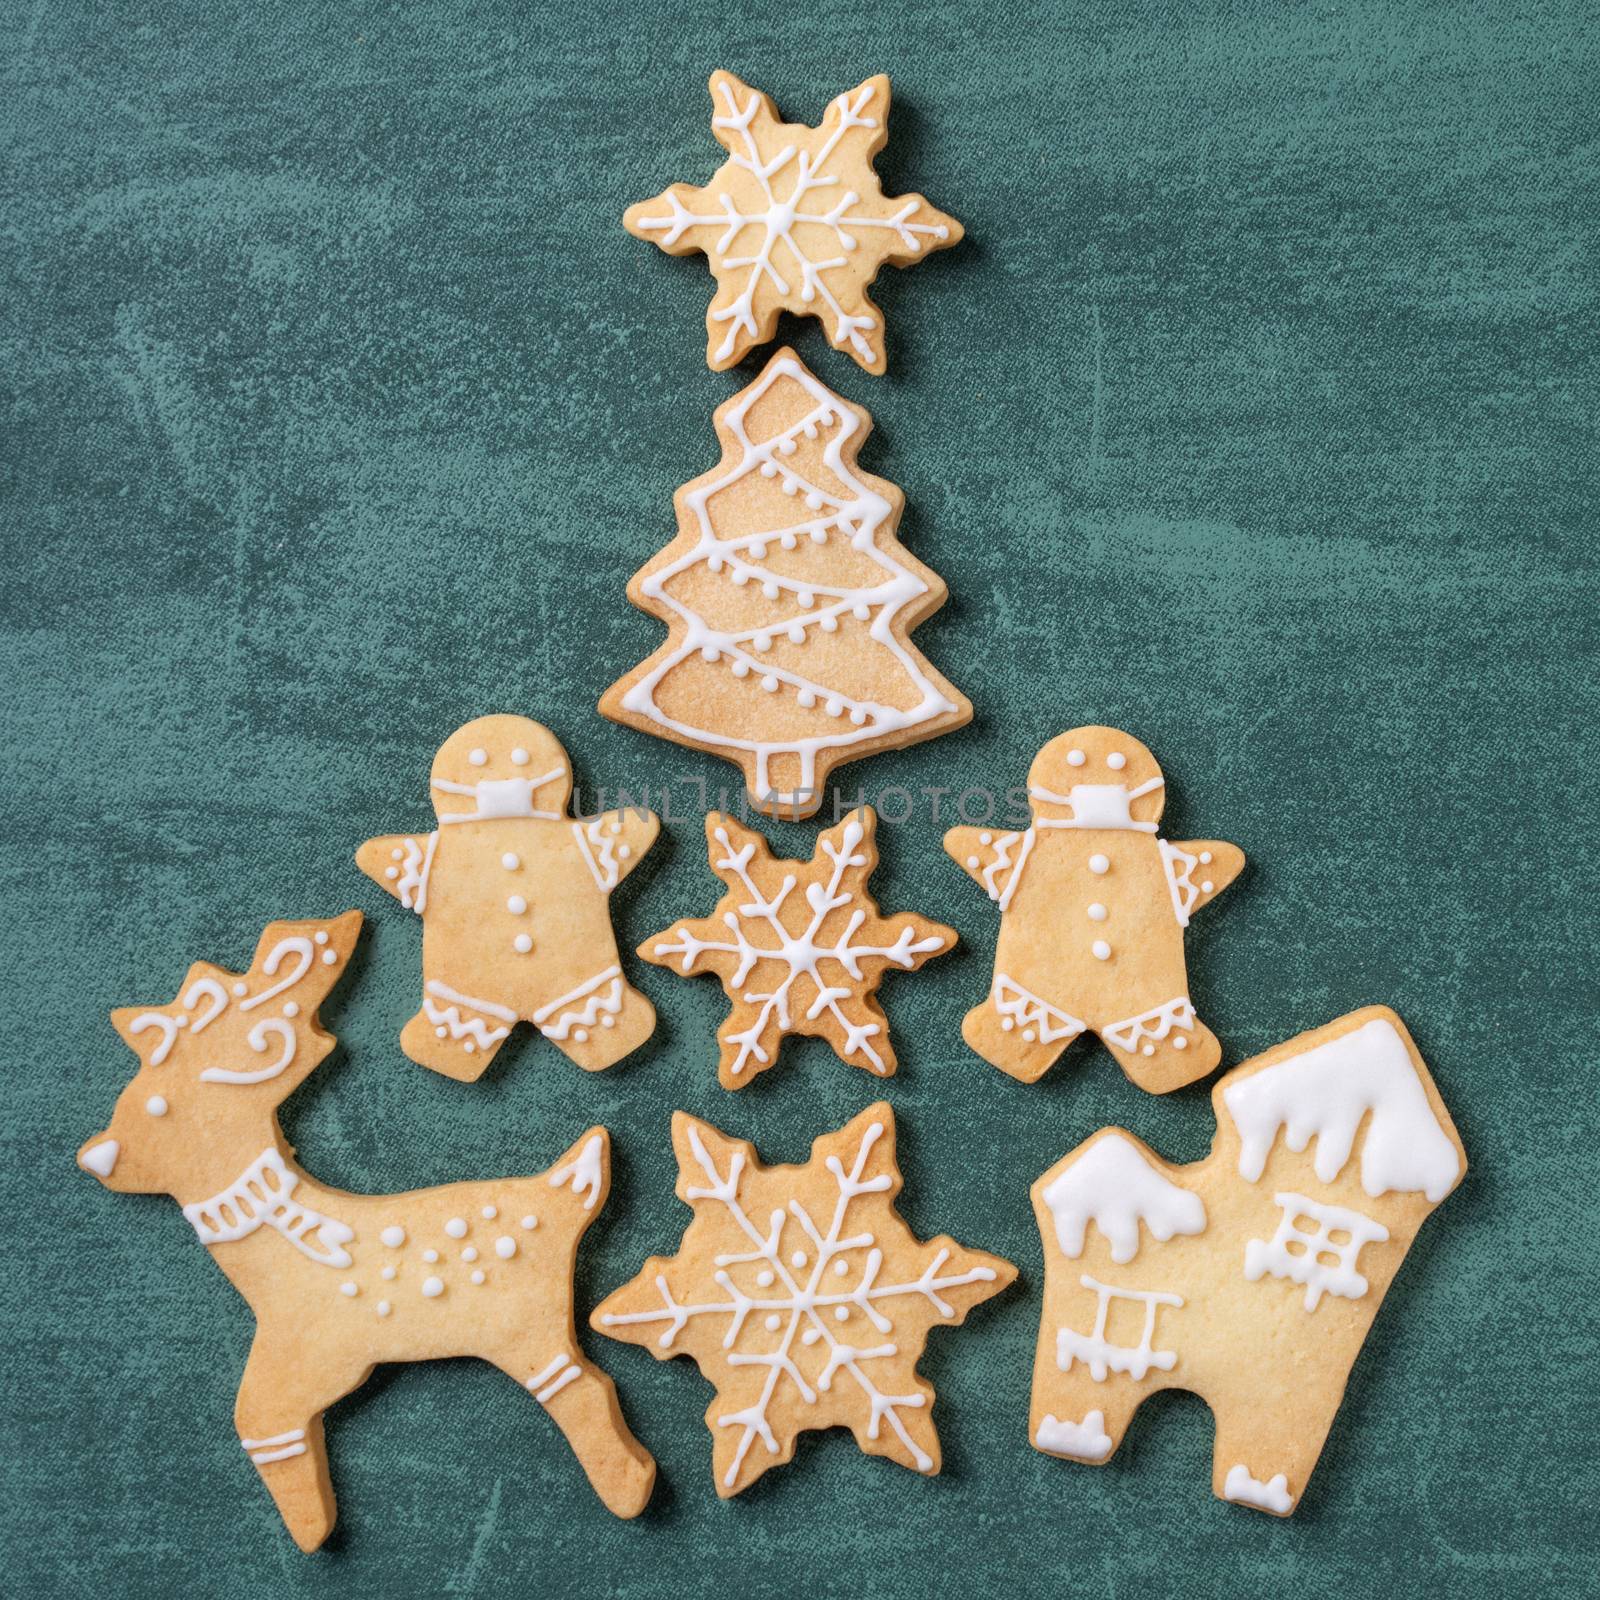 Top view of Christmas tree and snowflake cooikes with gingerbread man wearing mask on green table background.